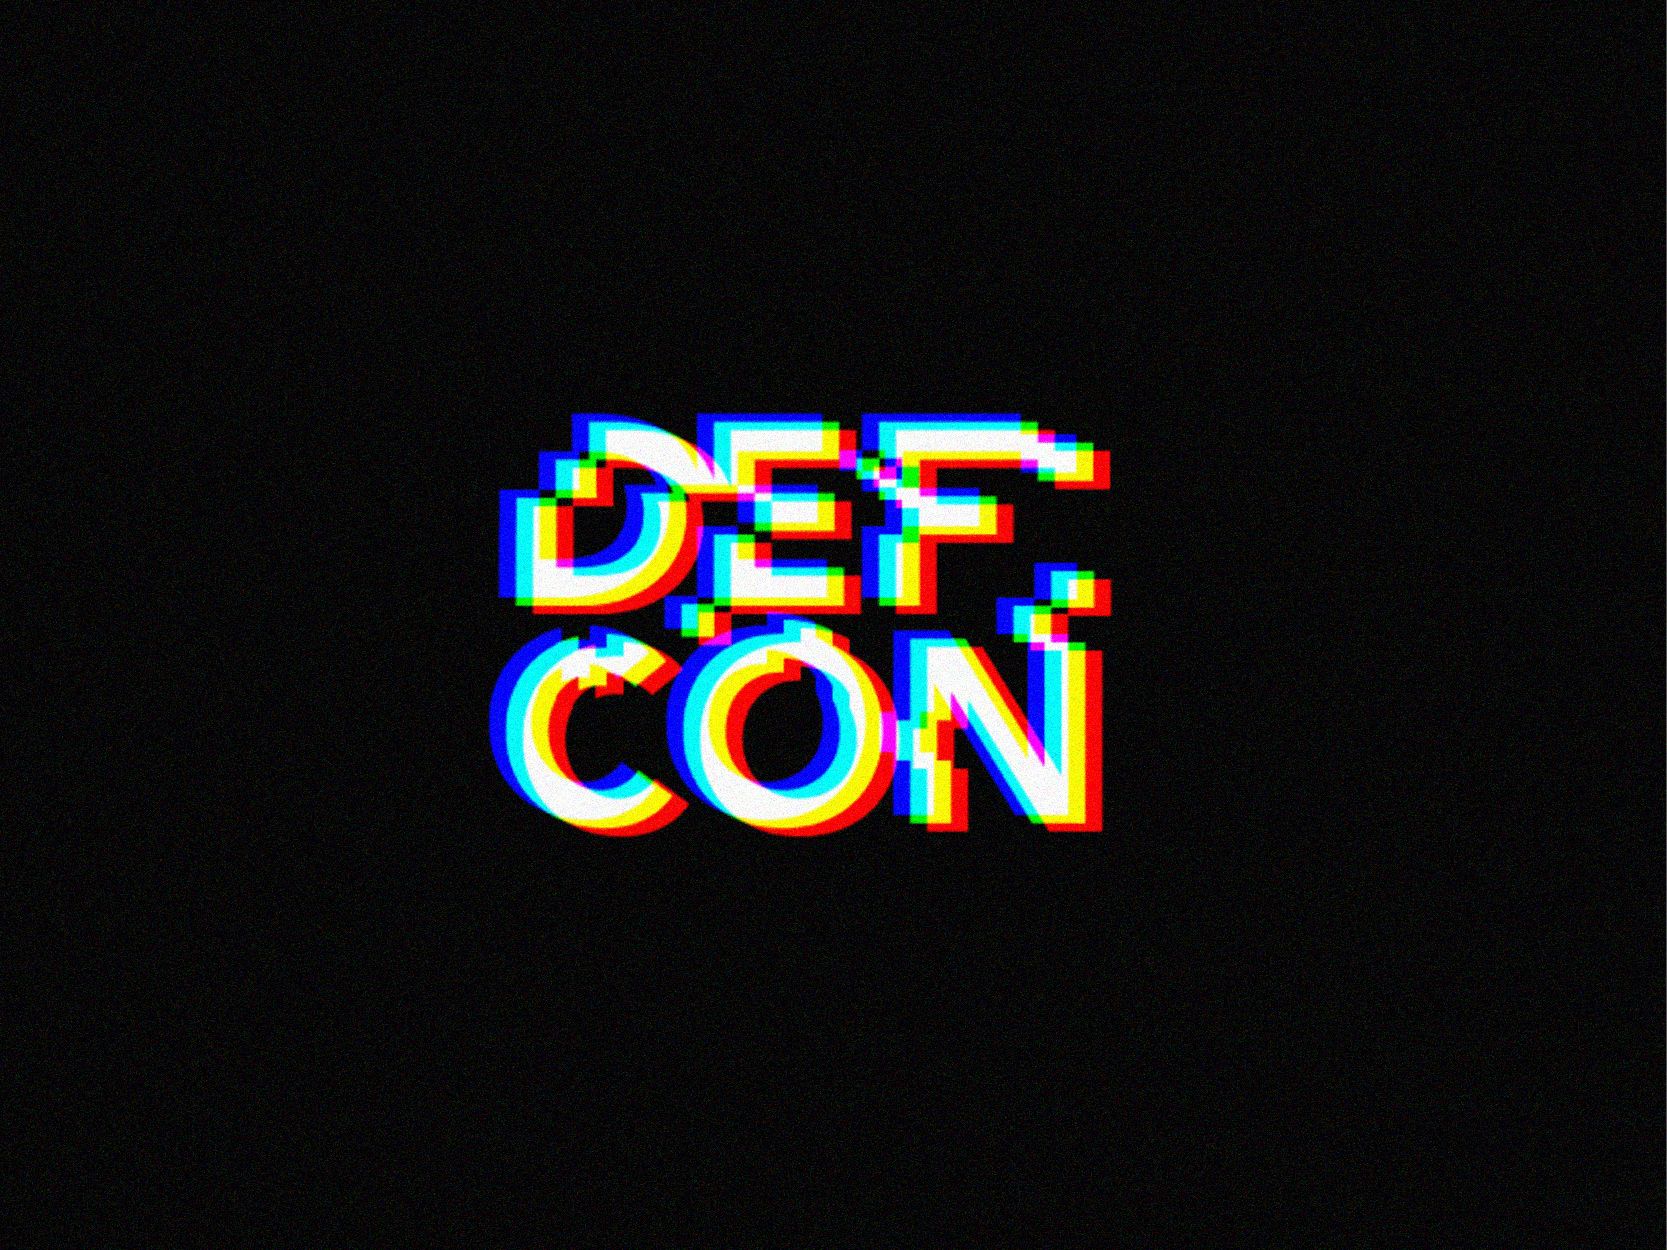 DEF CON Groups: What Works in 2018?